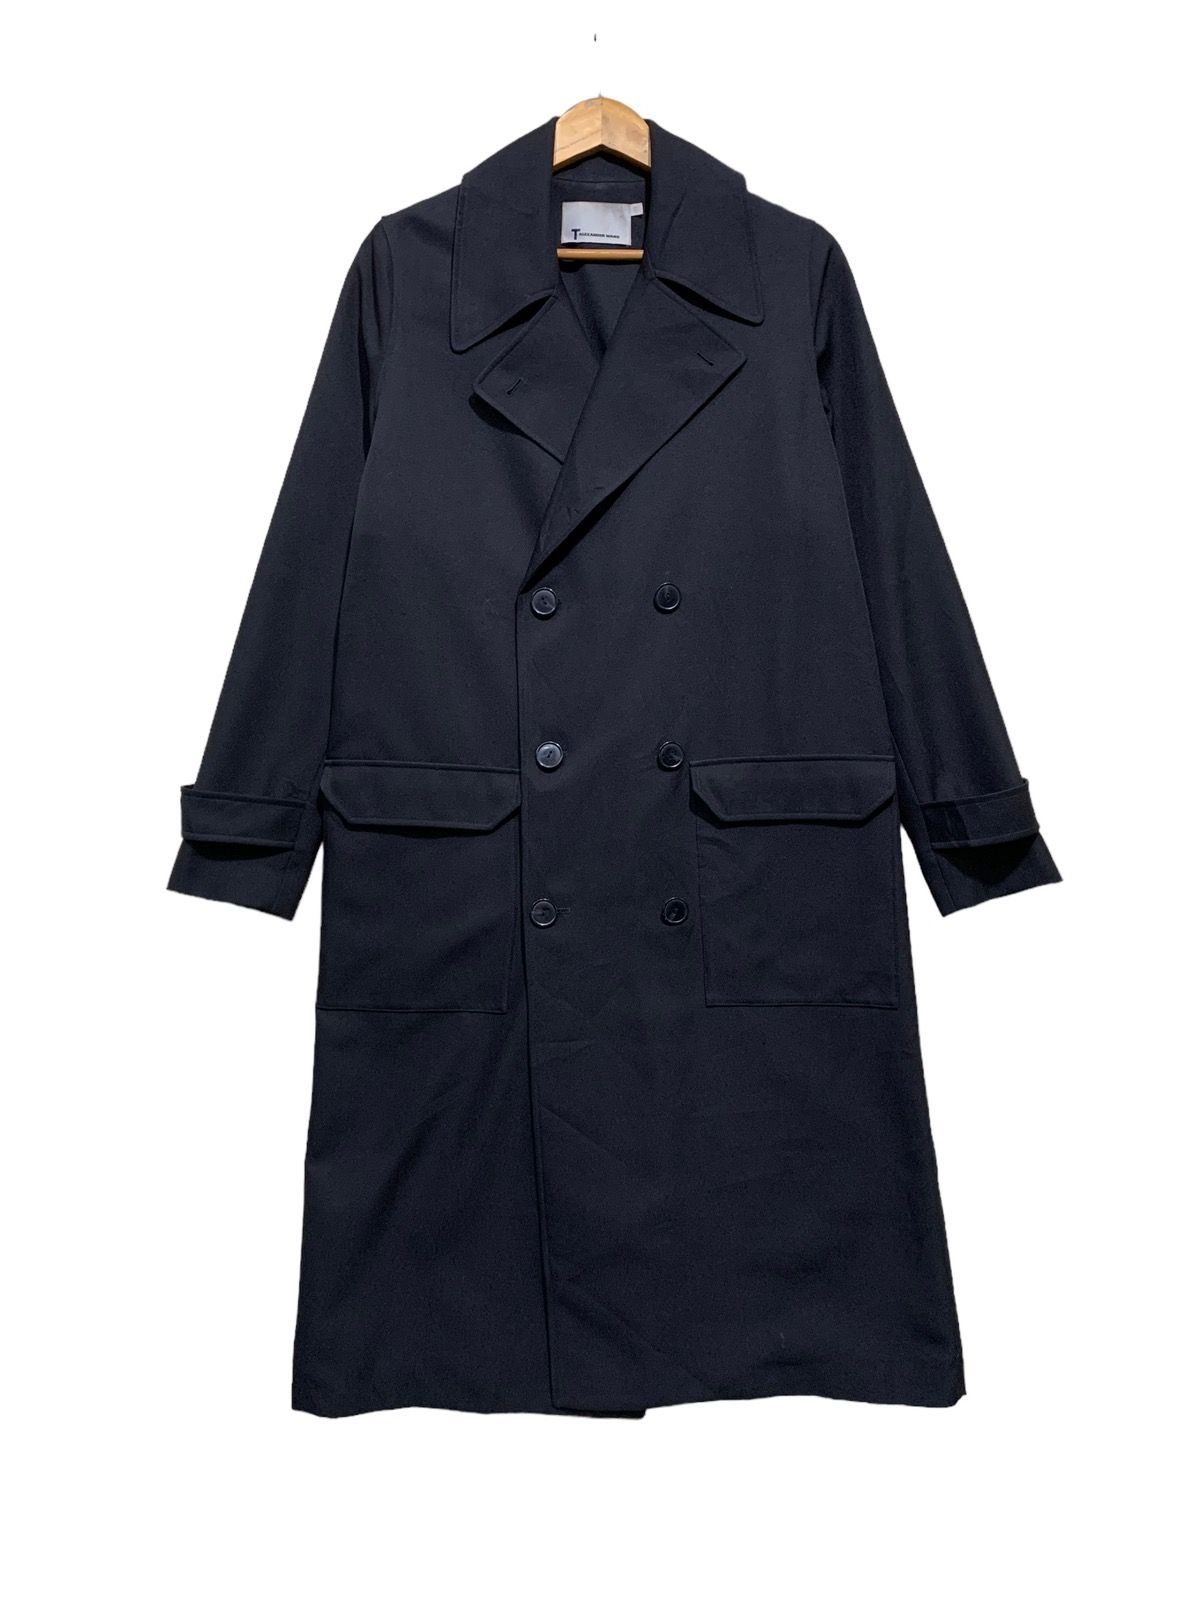 🔥ALEXANDER WANG DOUBLE BREAST TRENCH COATS - 1